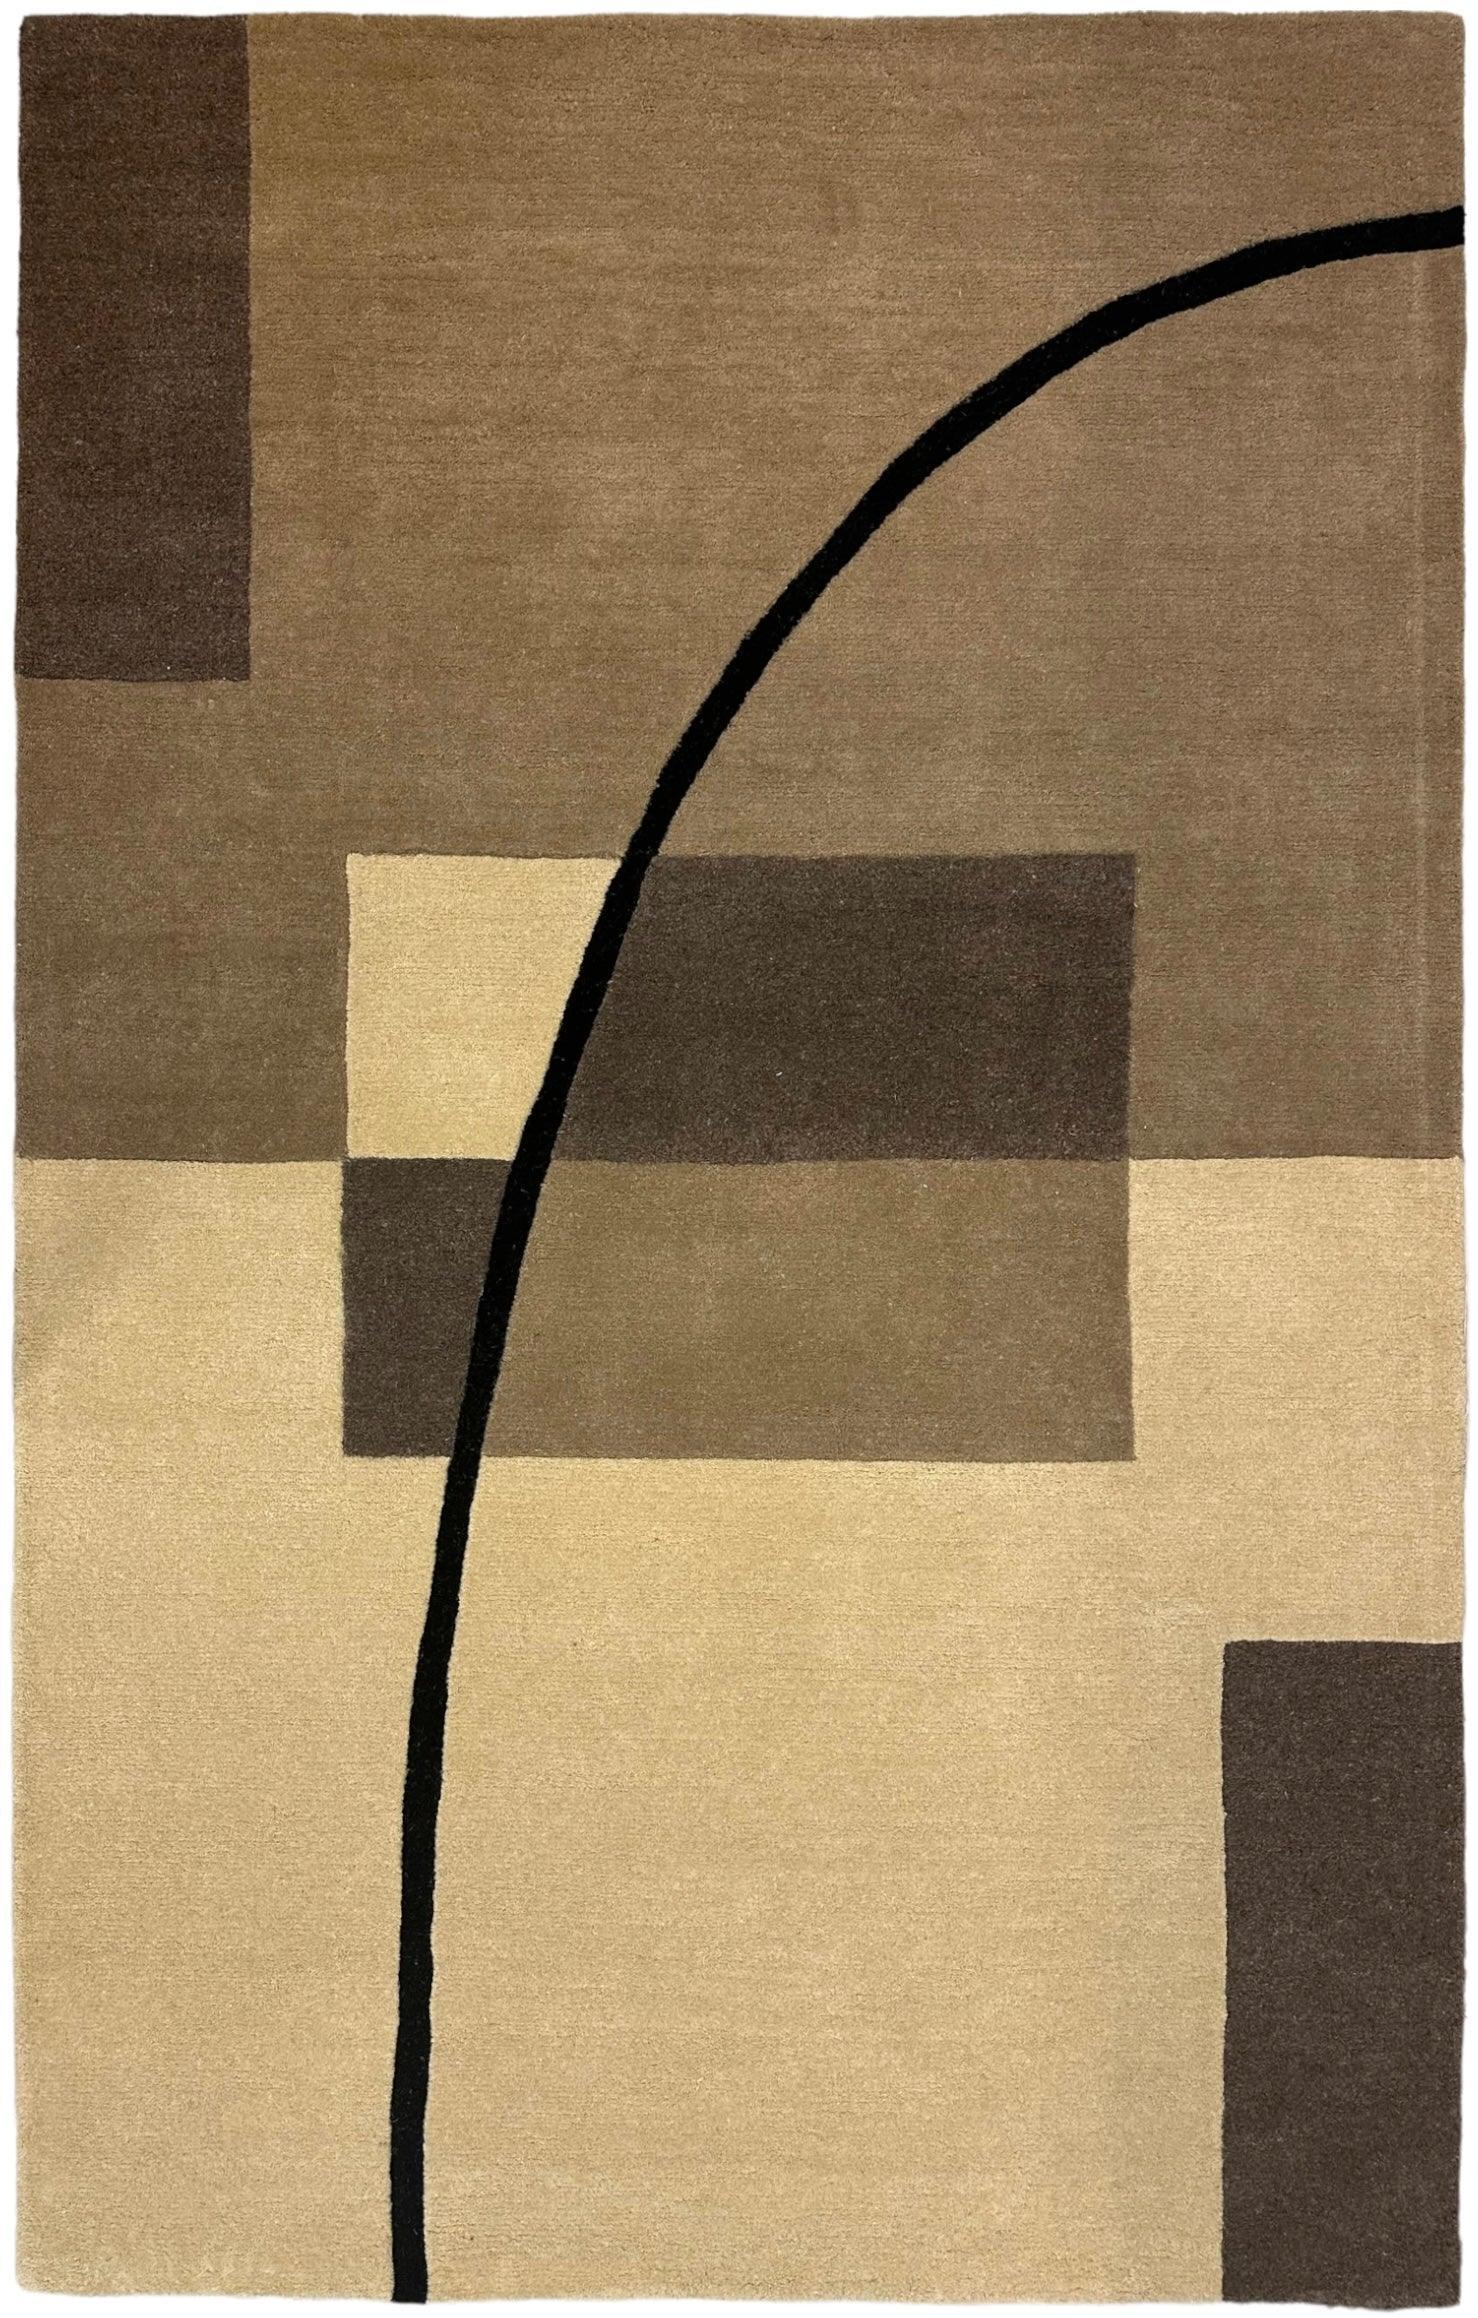 Hand Tufted Contemporary Geometric Wool Rug - 5’1” x 8’